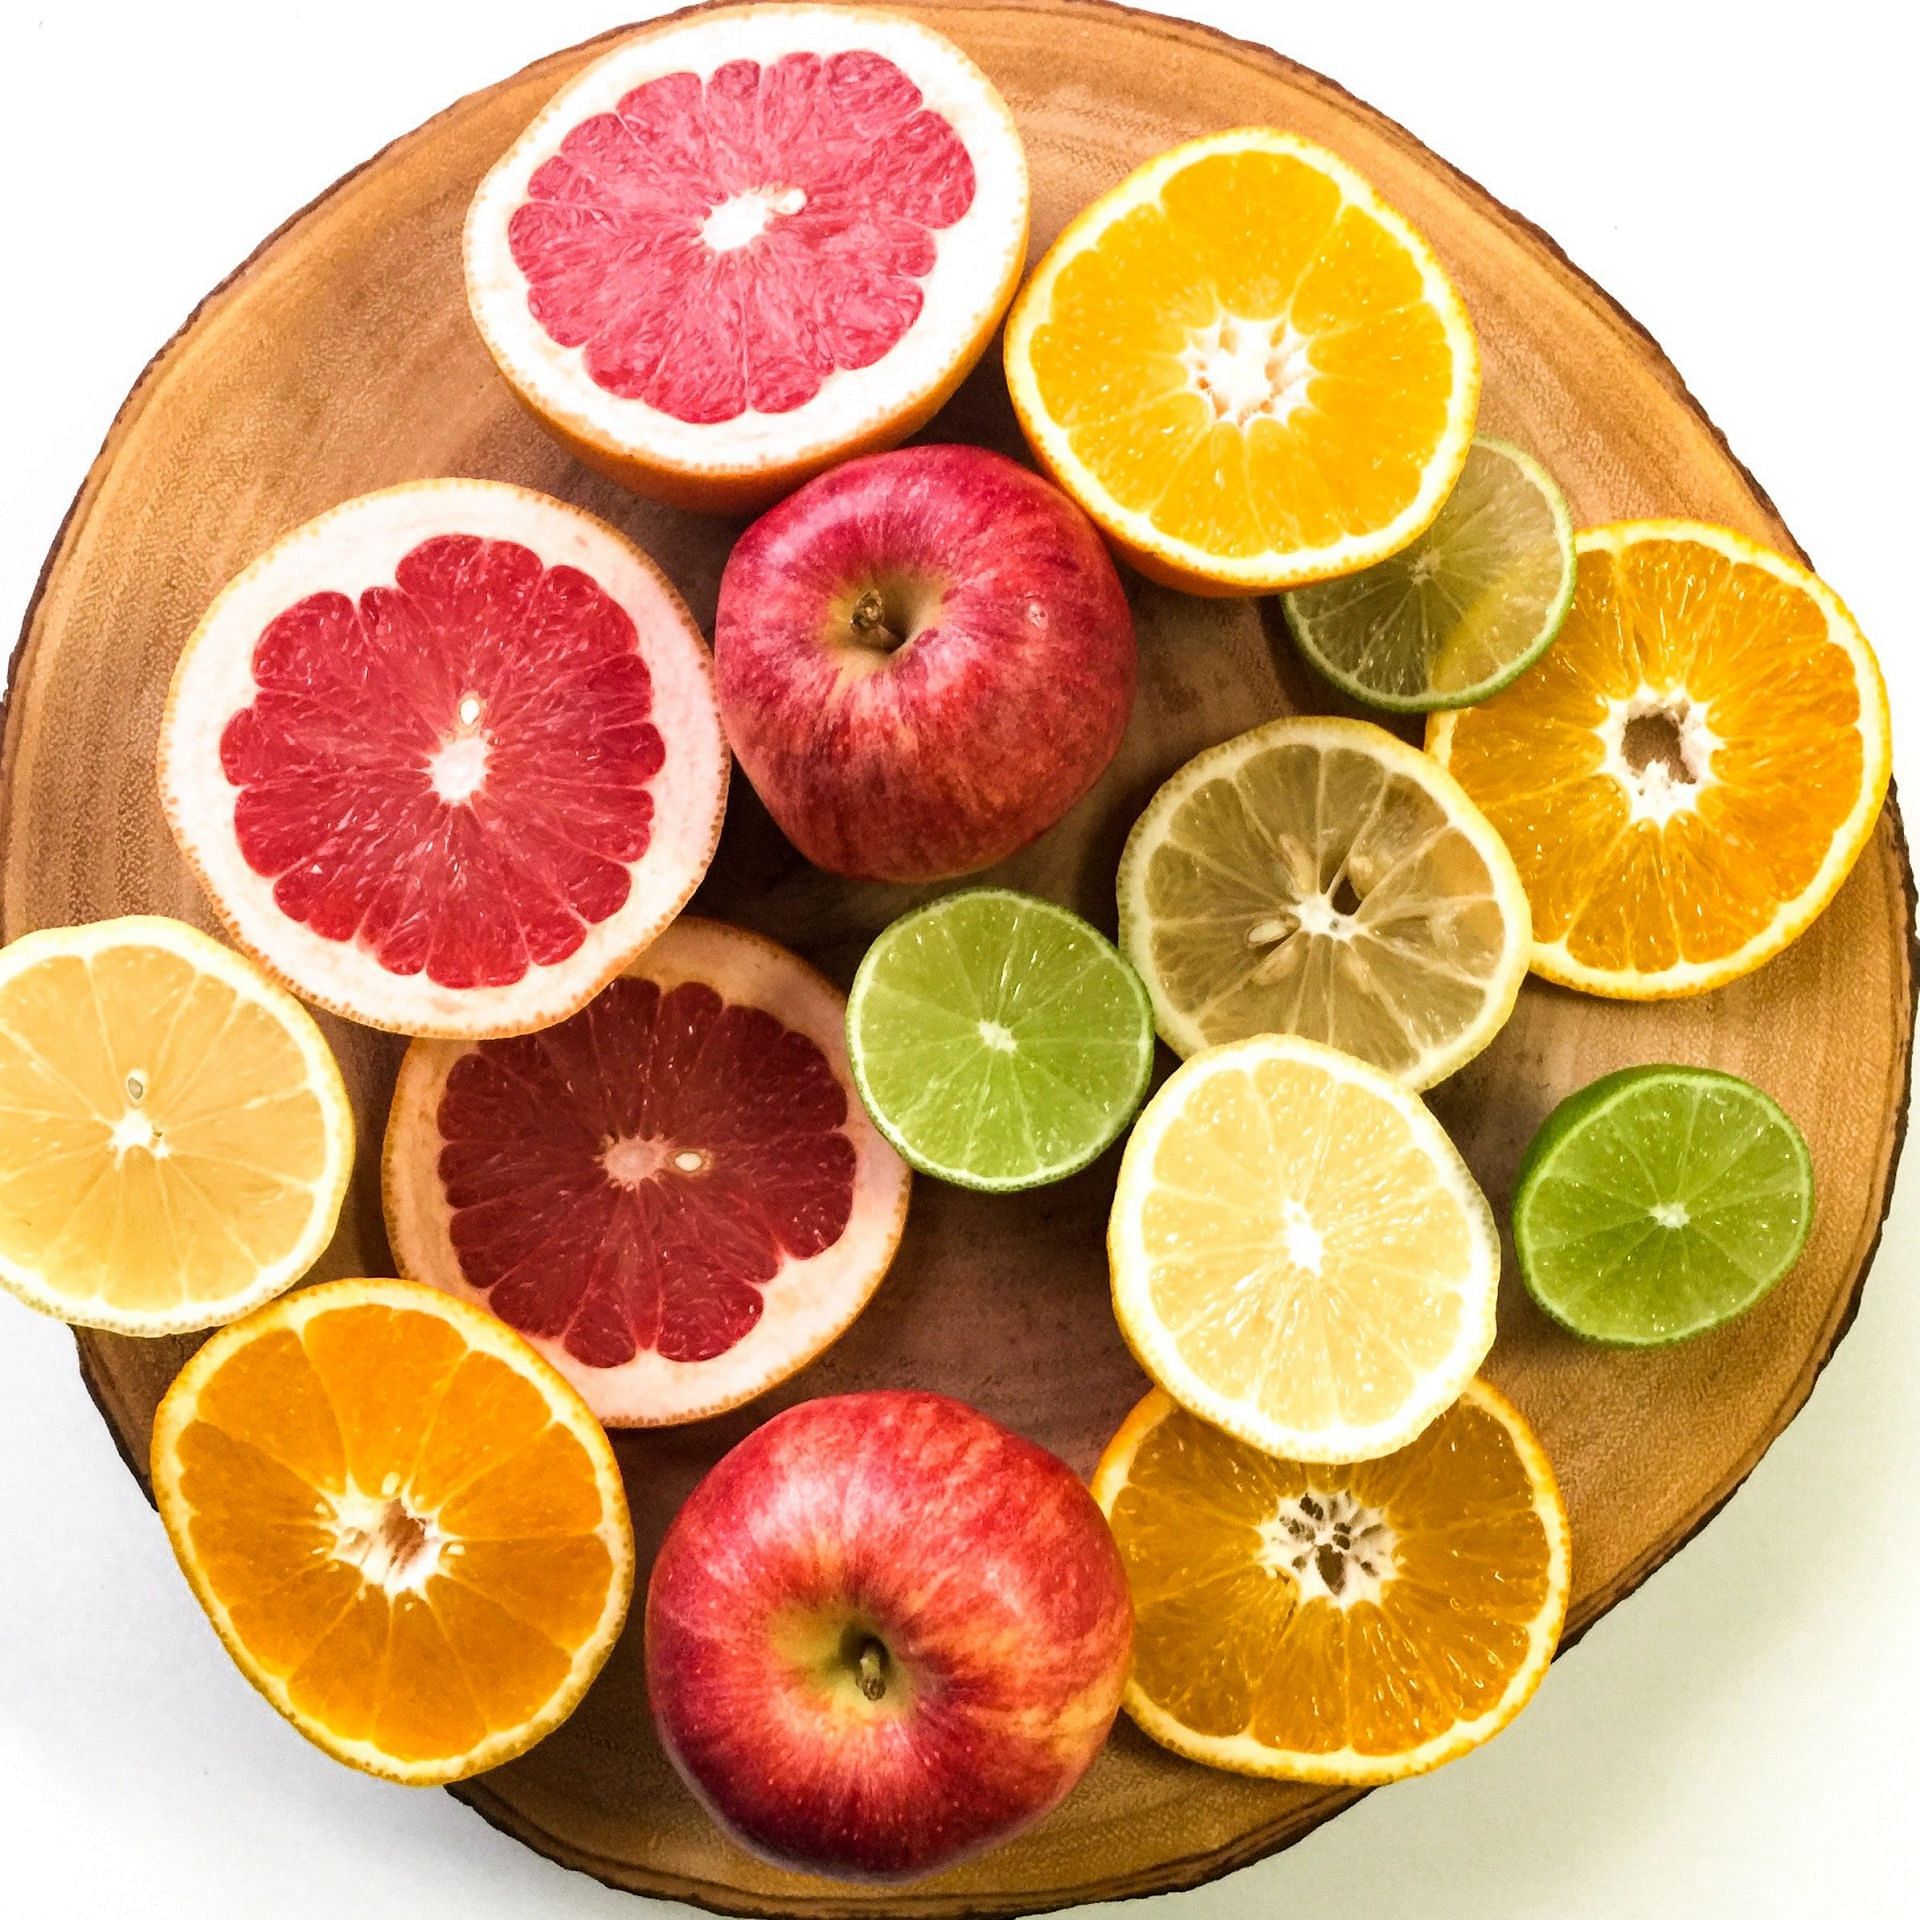 Citrus fruits are an excellent source of Vitamin C,\ which is essential in the production of WBCs (Image via Pexels)